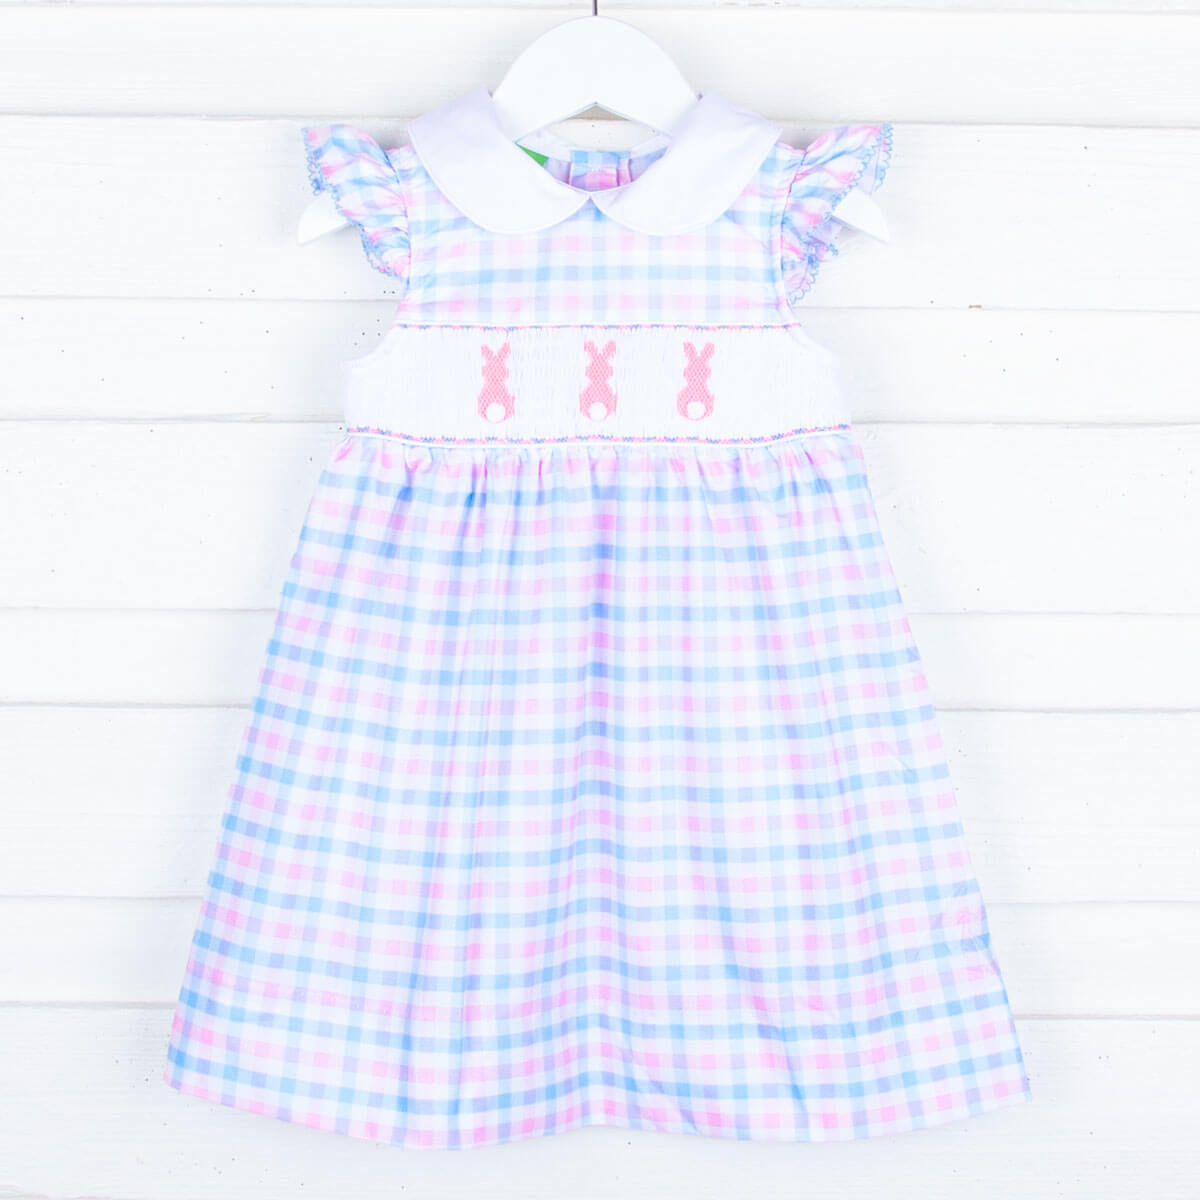 Bunny Bum Smocked Pink and Blue Collared Dress